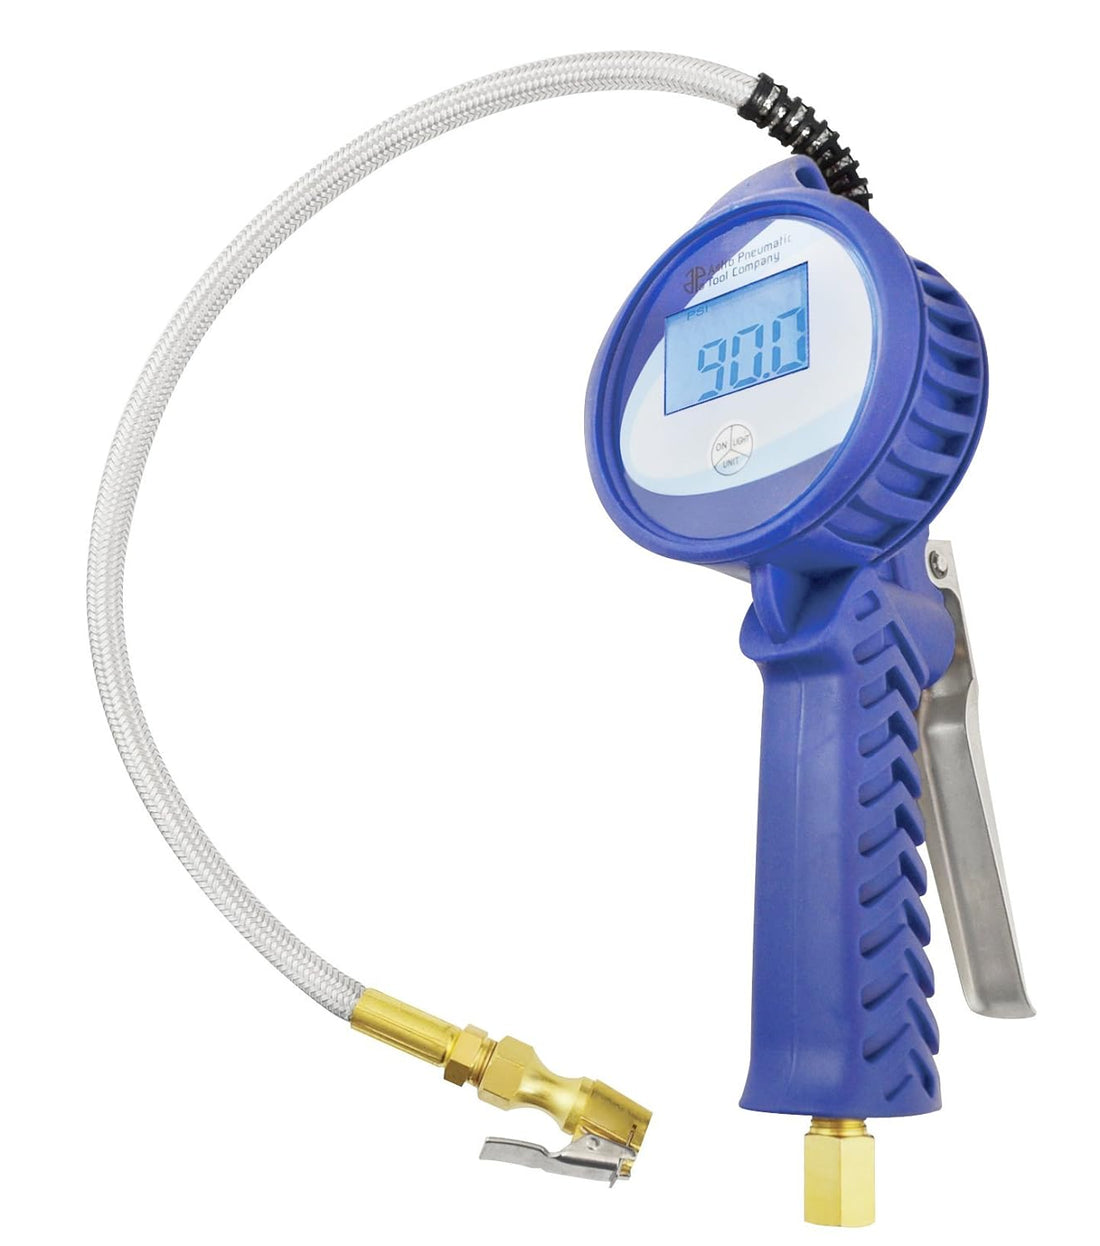 Astro Pneumatic (AST3018) 3.5" Digital Tire Inflator with Hose